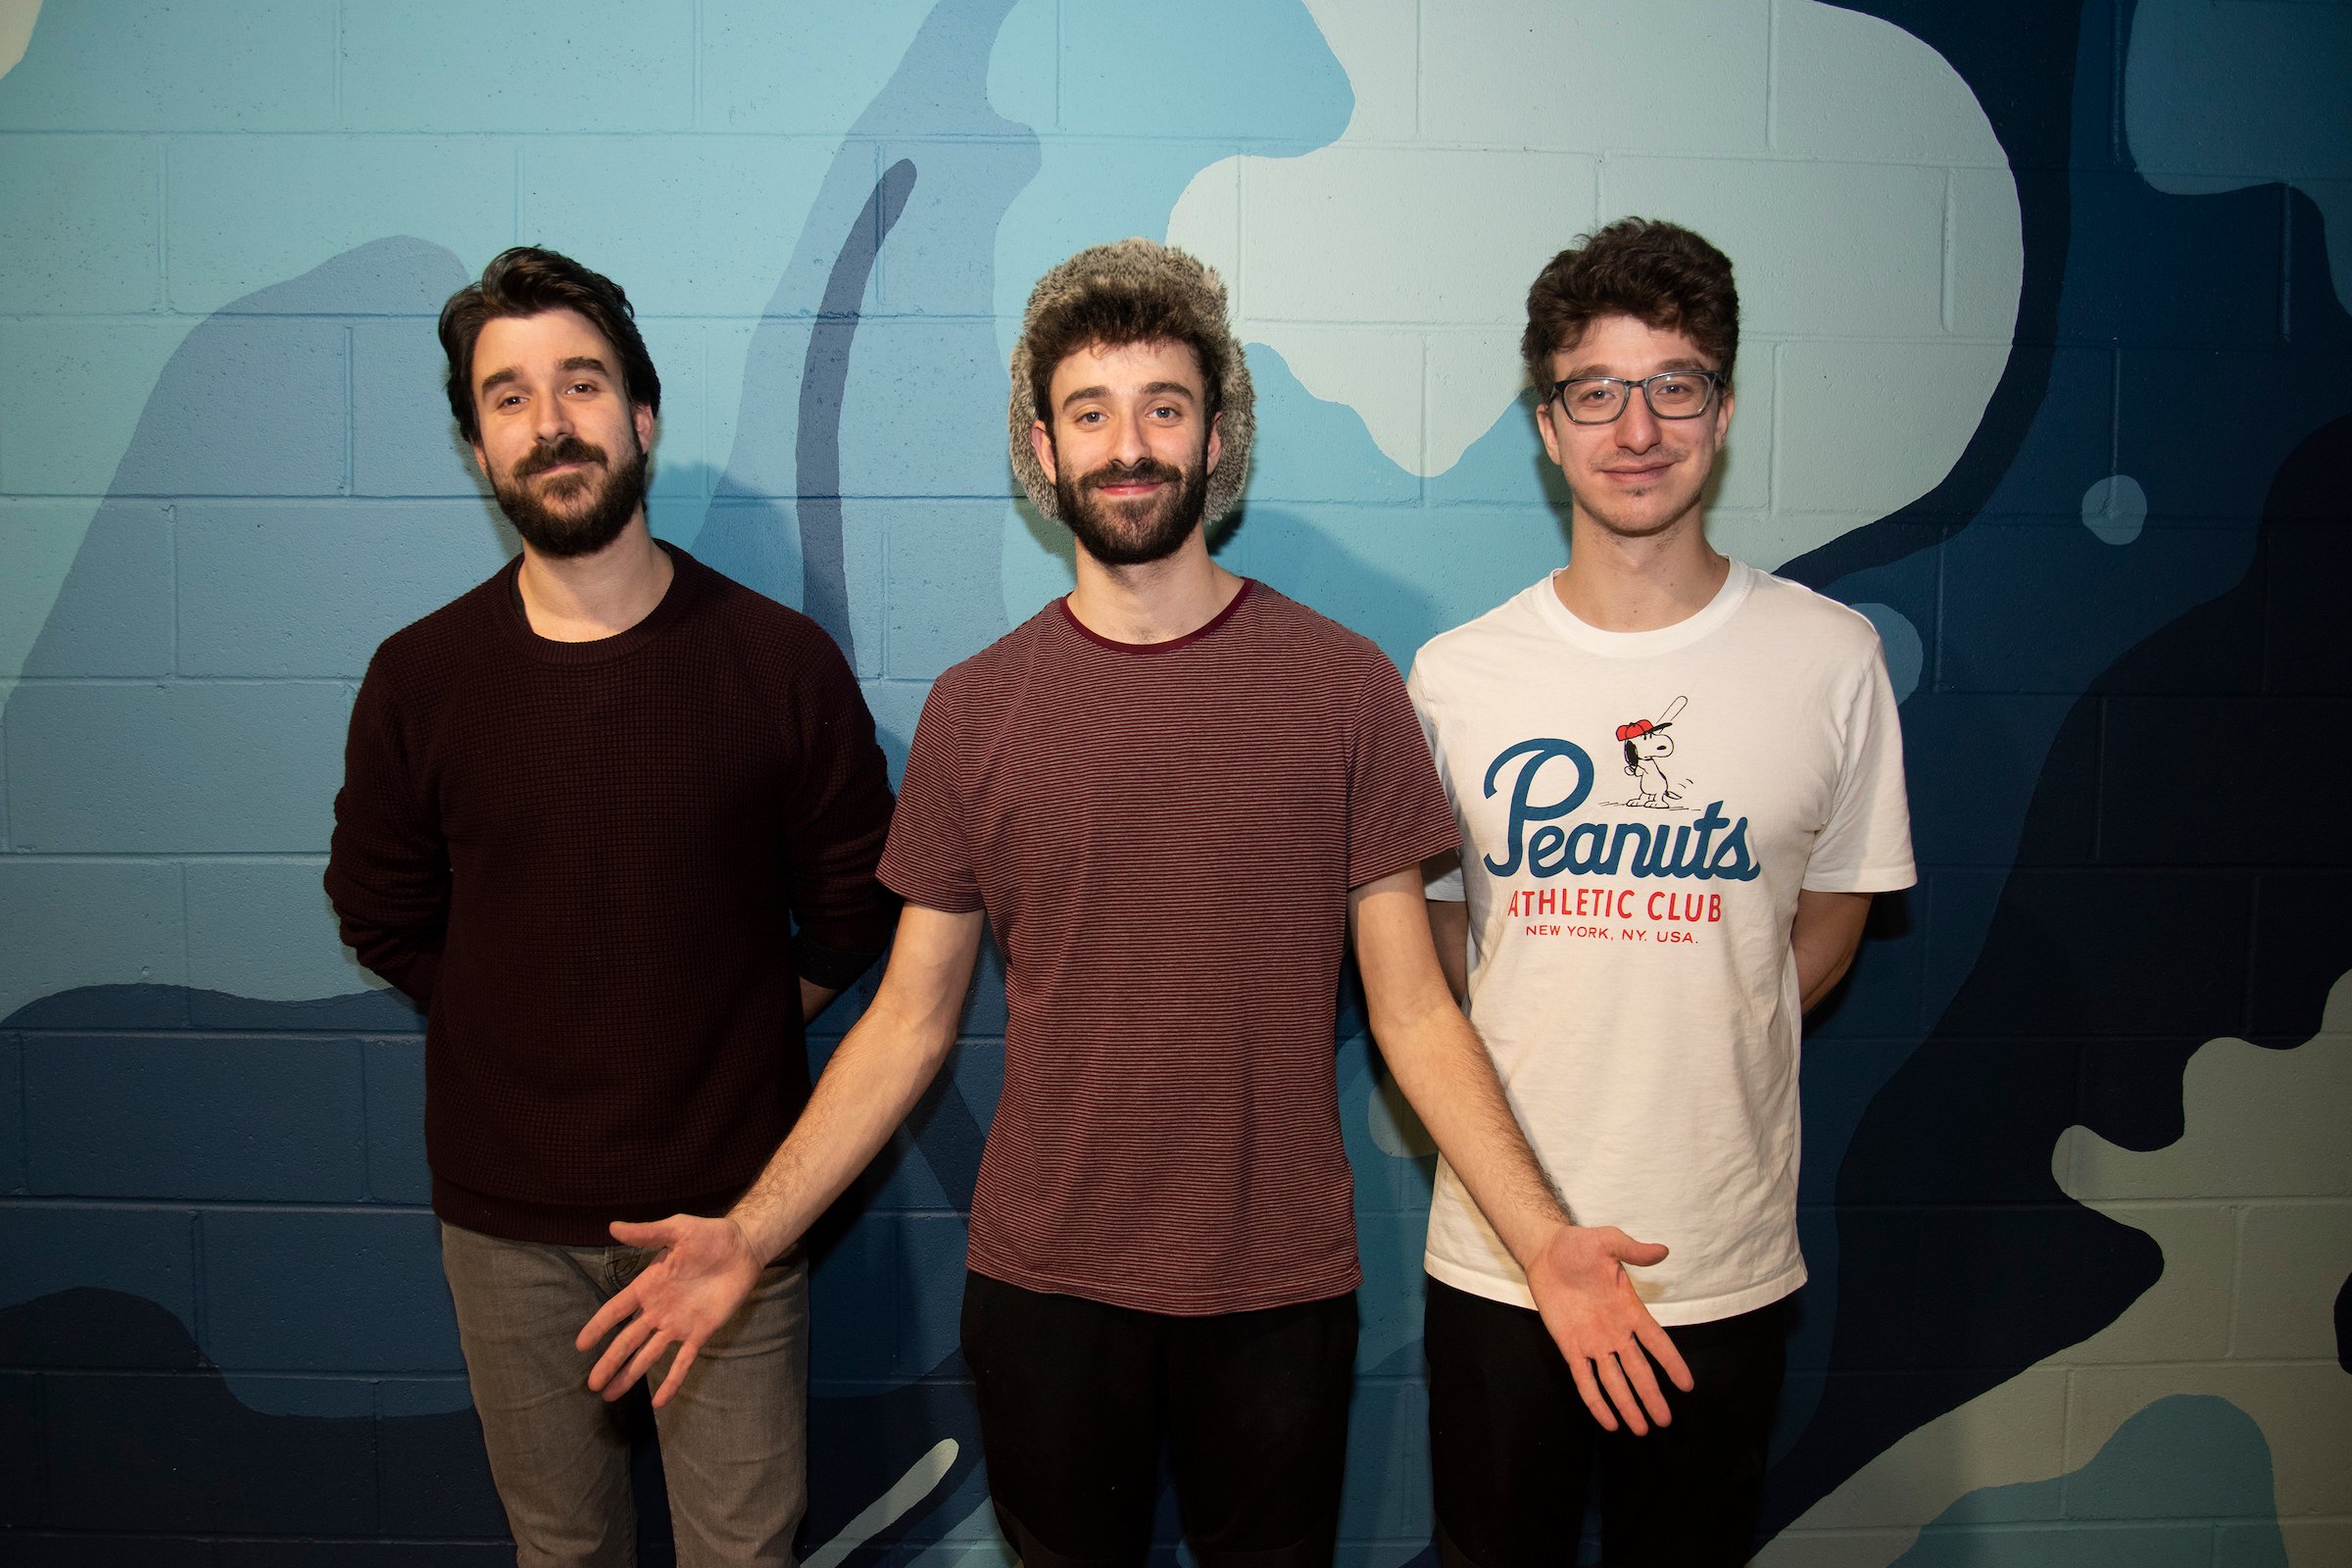 Adam, Jack and Ryan Met backstage before the LIVE Streamed iHeartRadio performance of AJR